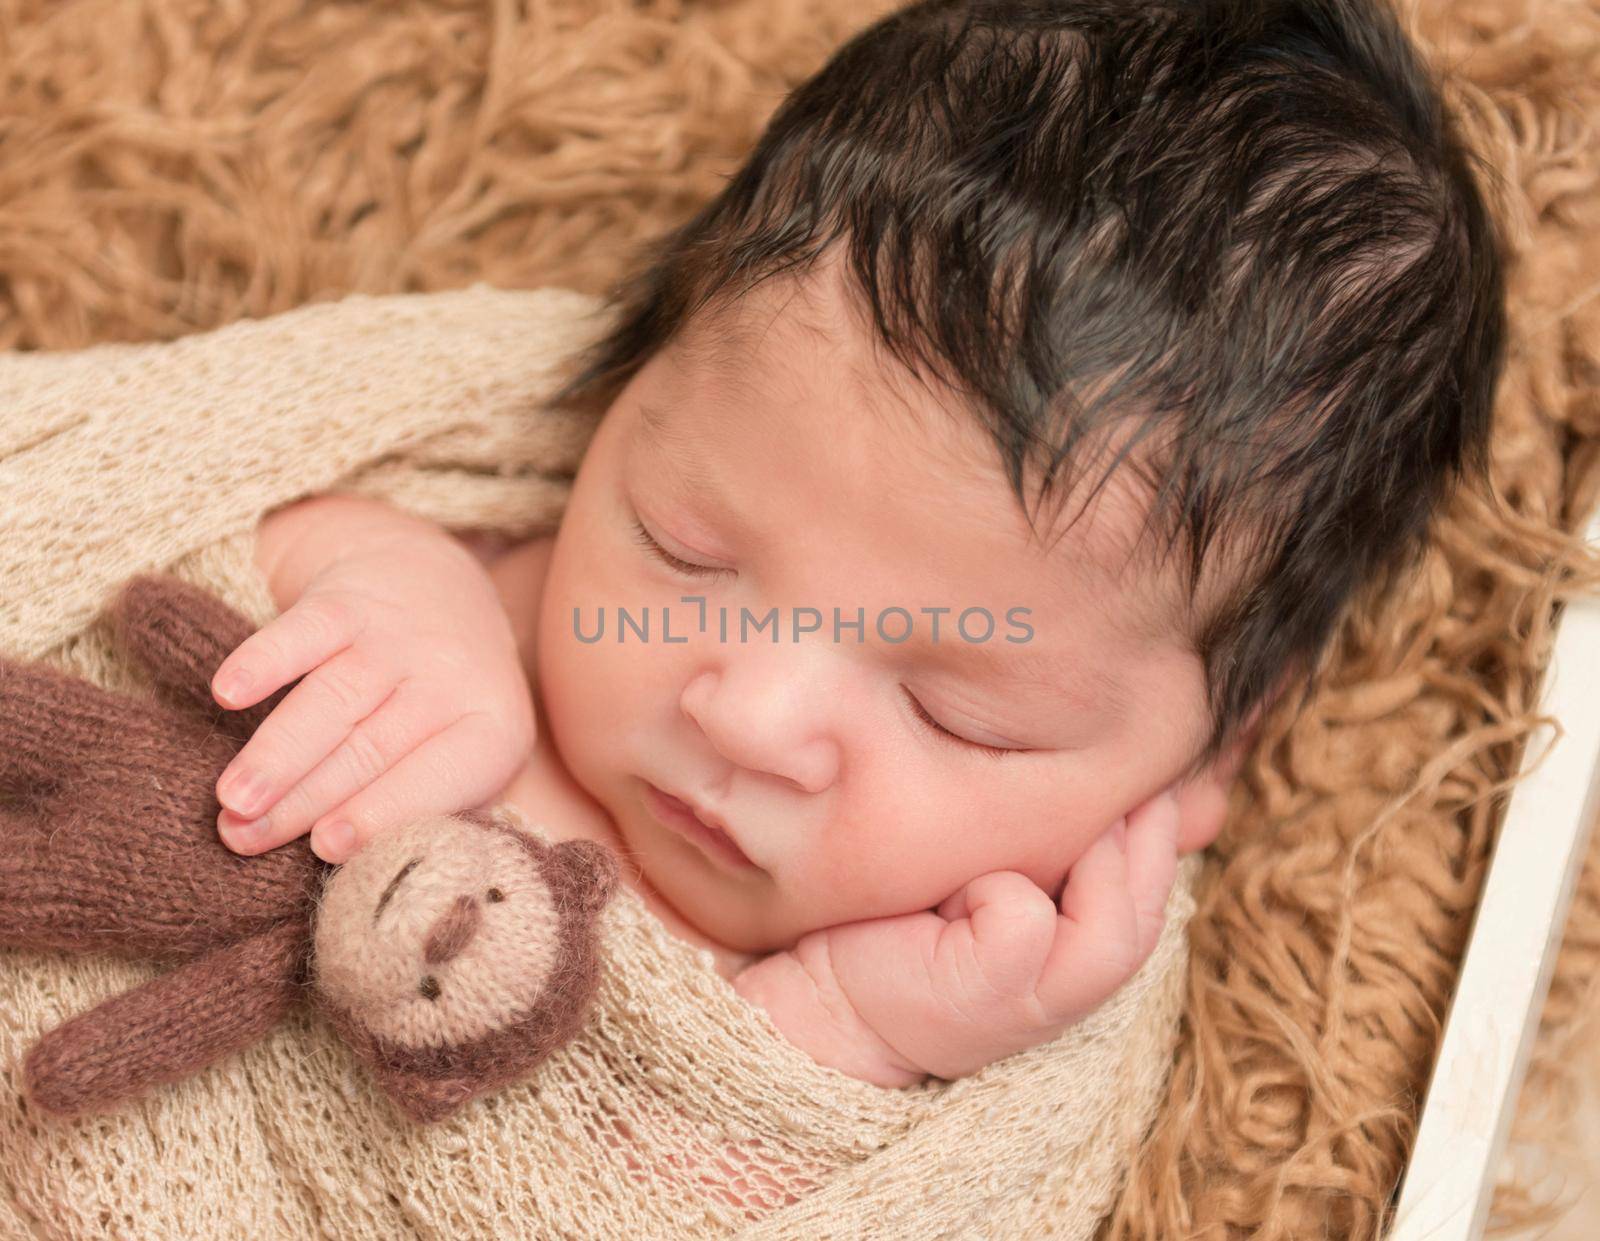 Small black-haired newborn sleeping with a monkey toy on a blanket, closeup